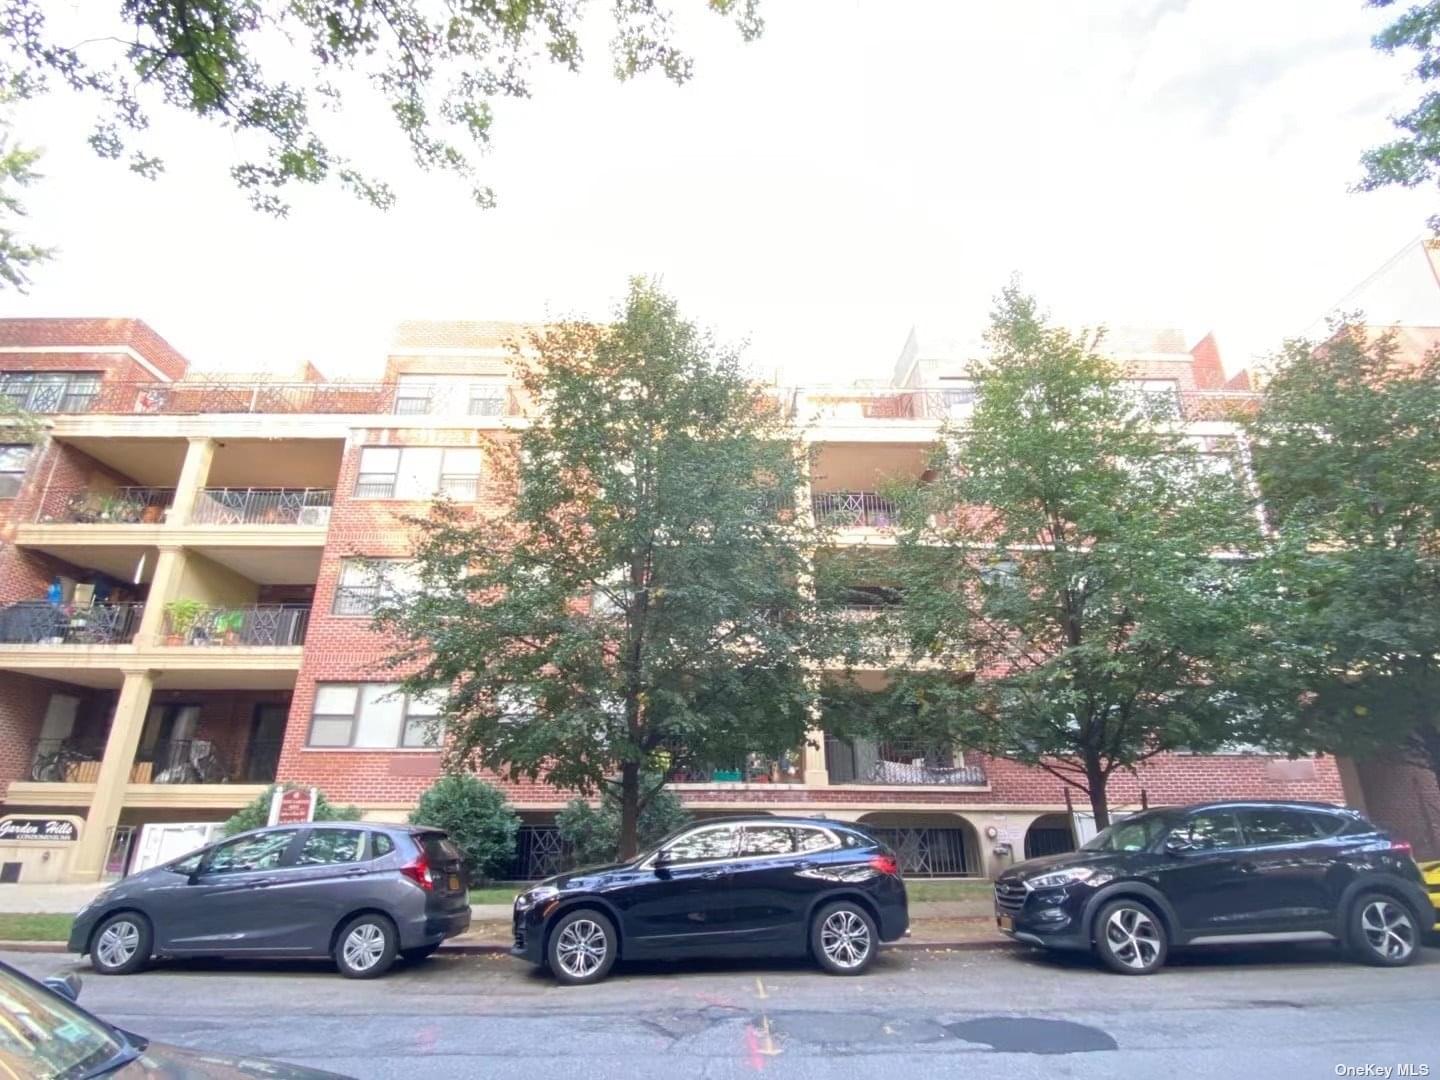 71-23 162 Street #1 i in Queens, Fresh Meadows, NY 11365